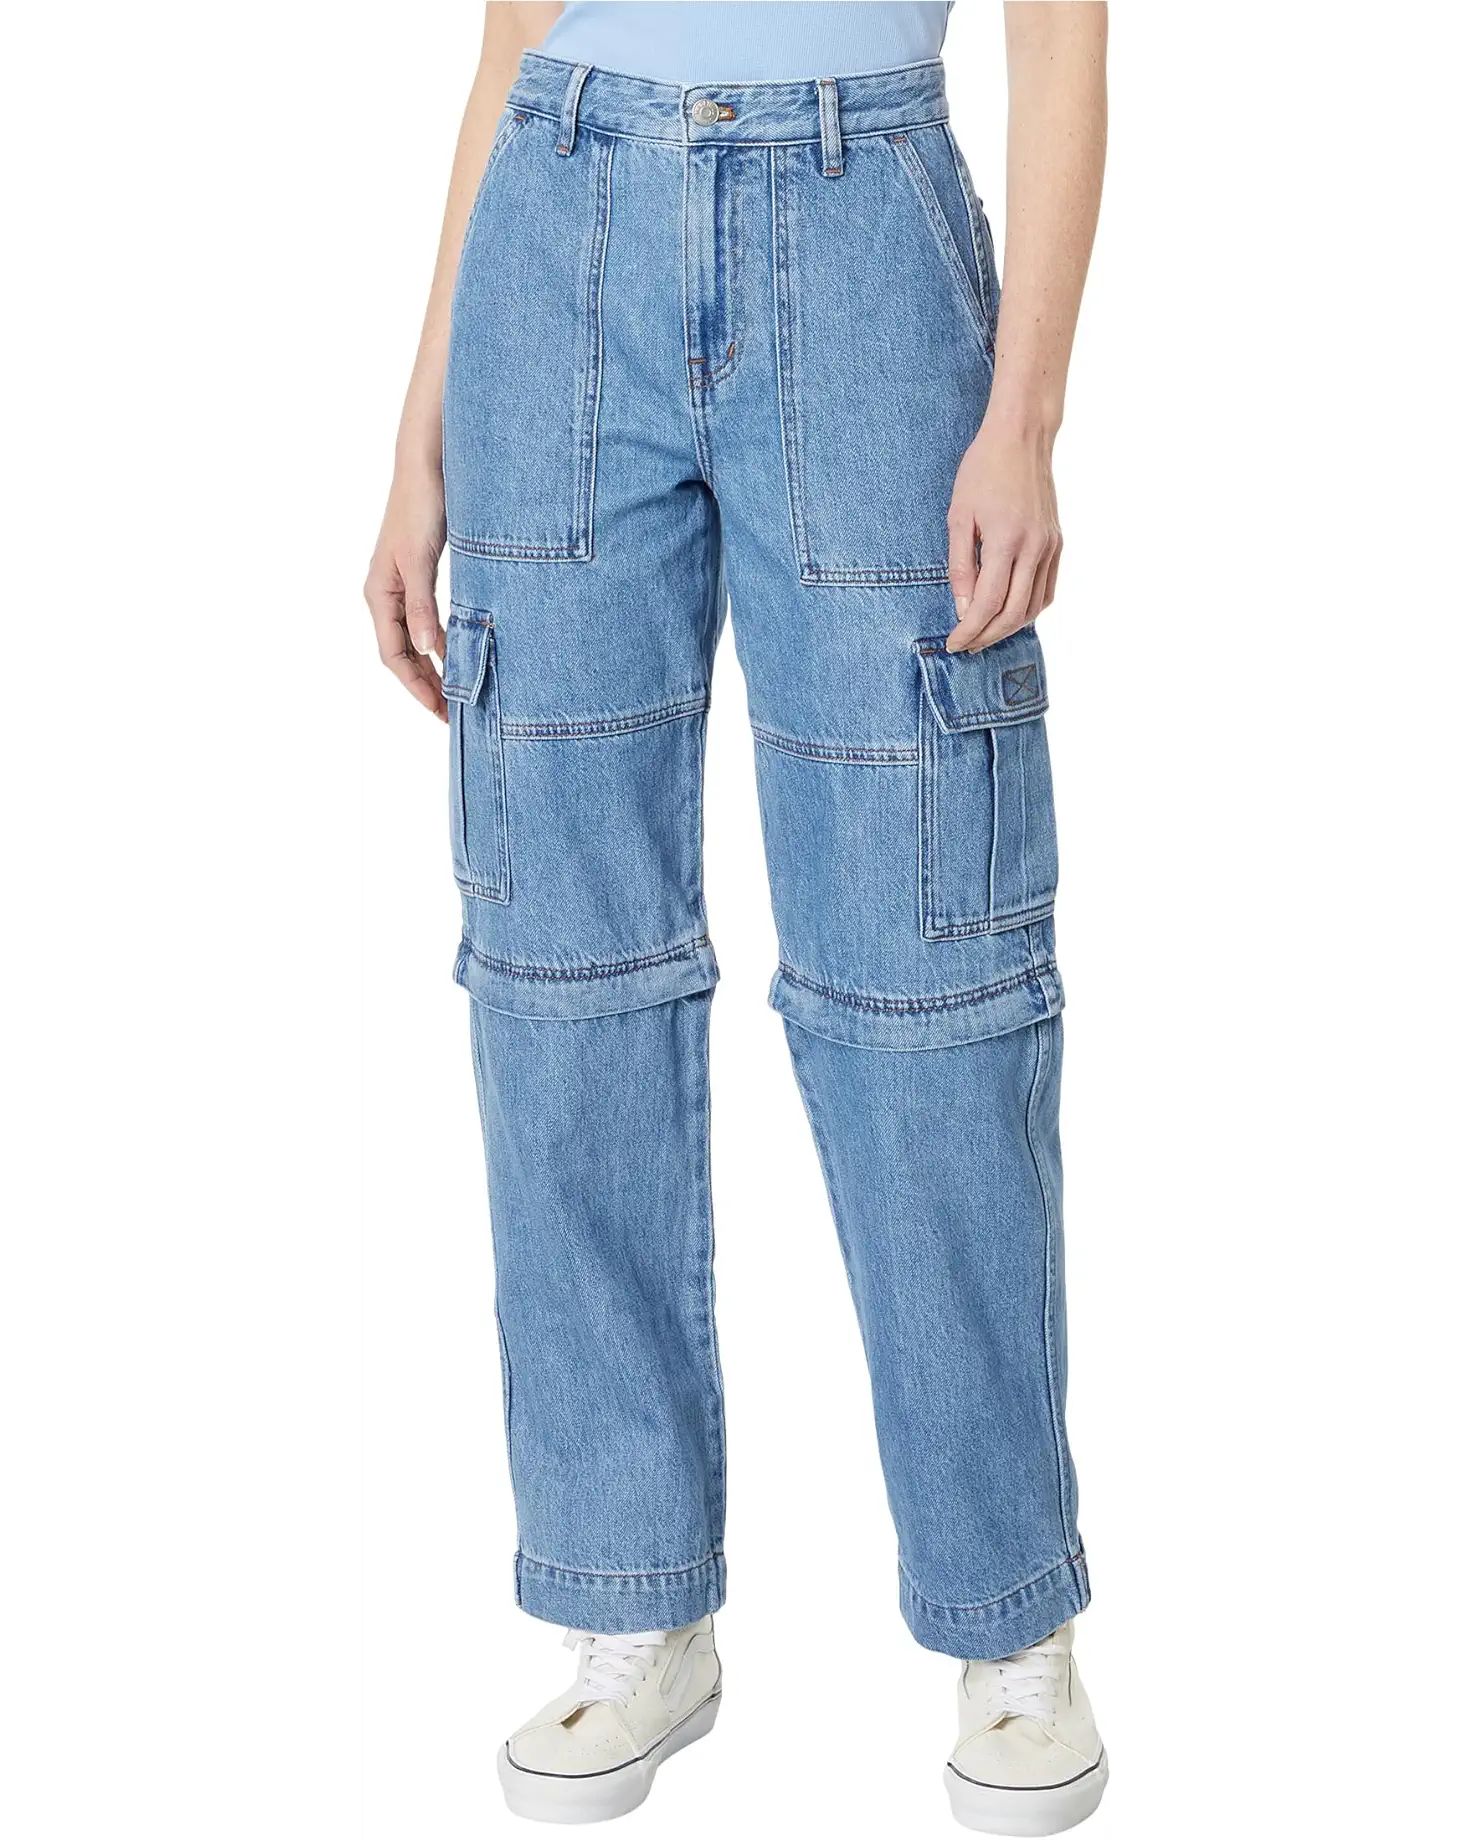 Madewell Baggy Straight Cargo Jeans in Thetford Wash: Zip-Off Edition | Zappos